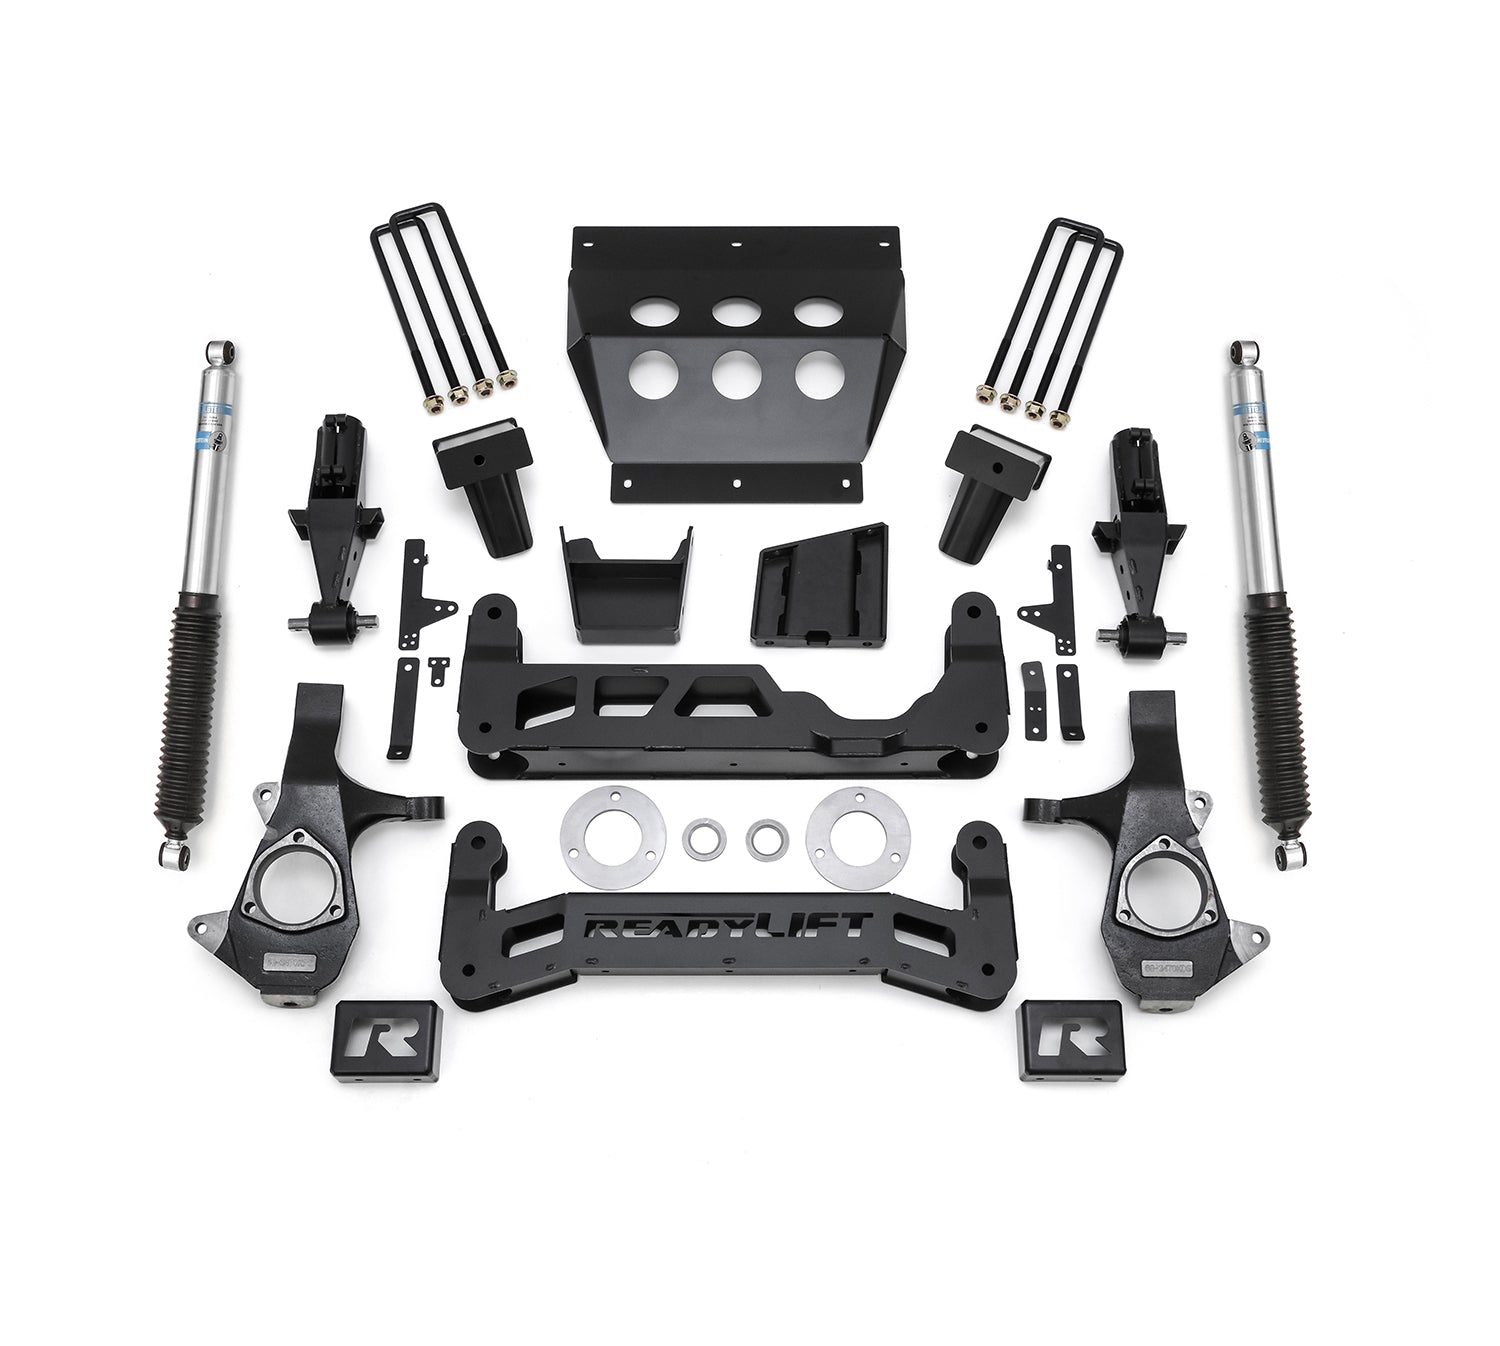 ReadyLift 44-3471 2014-2018 7'' Big Lift Kit for Cast Steel OE Upper Control Arms with Bilstein Shocks